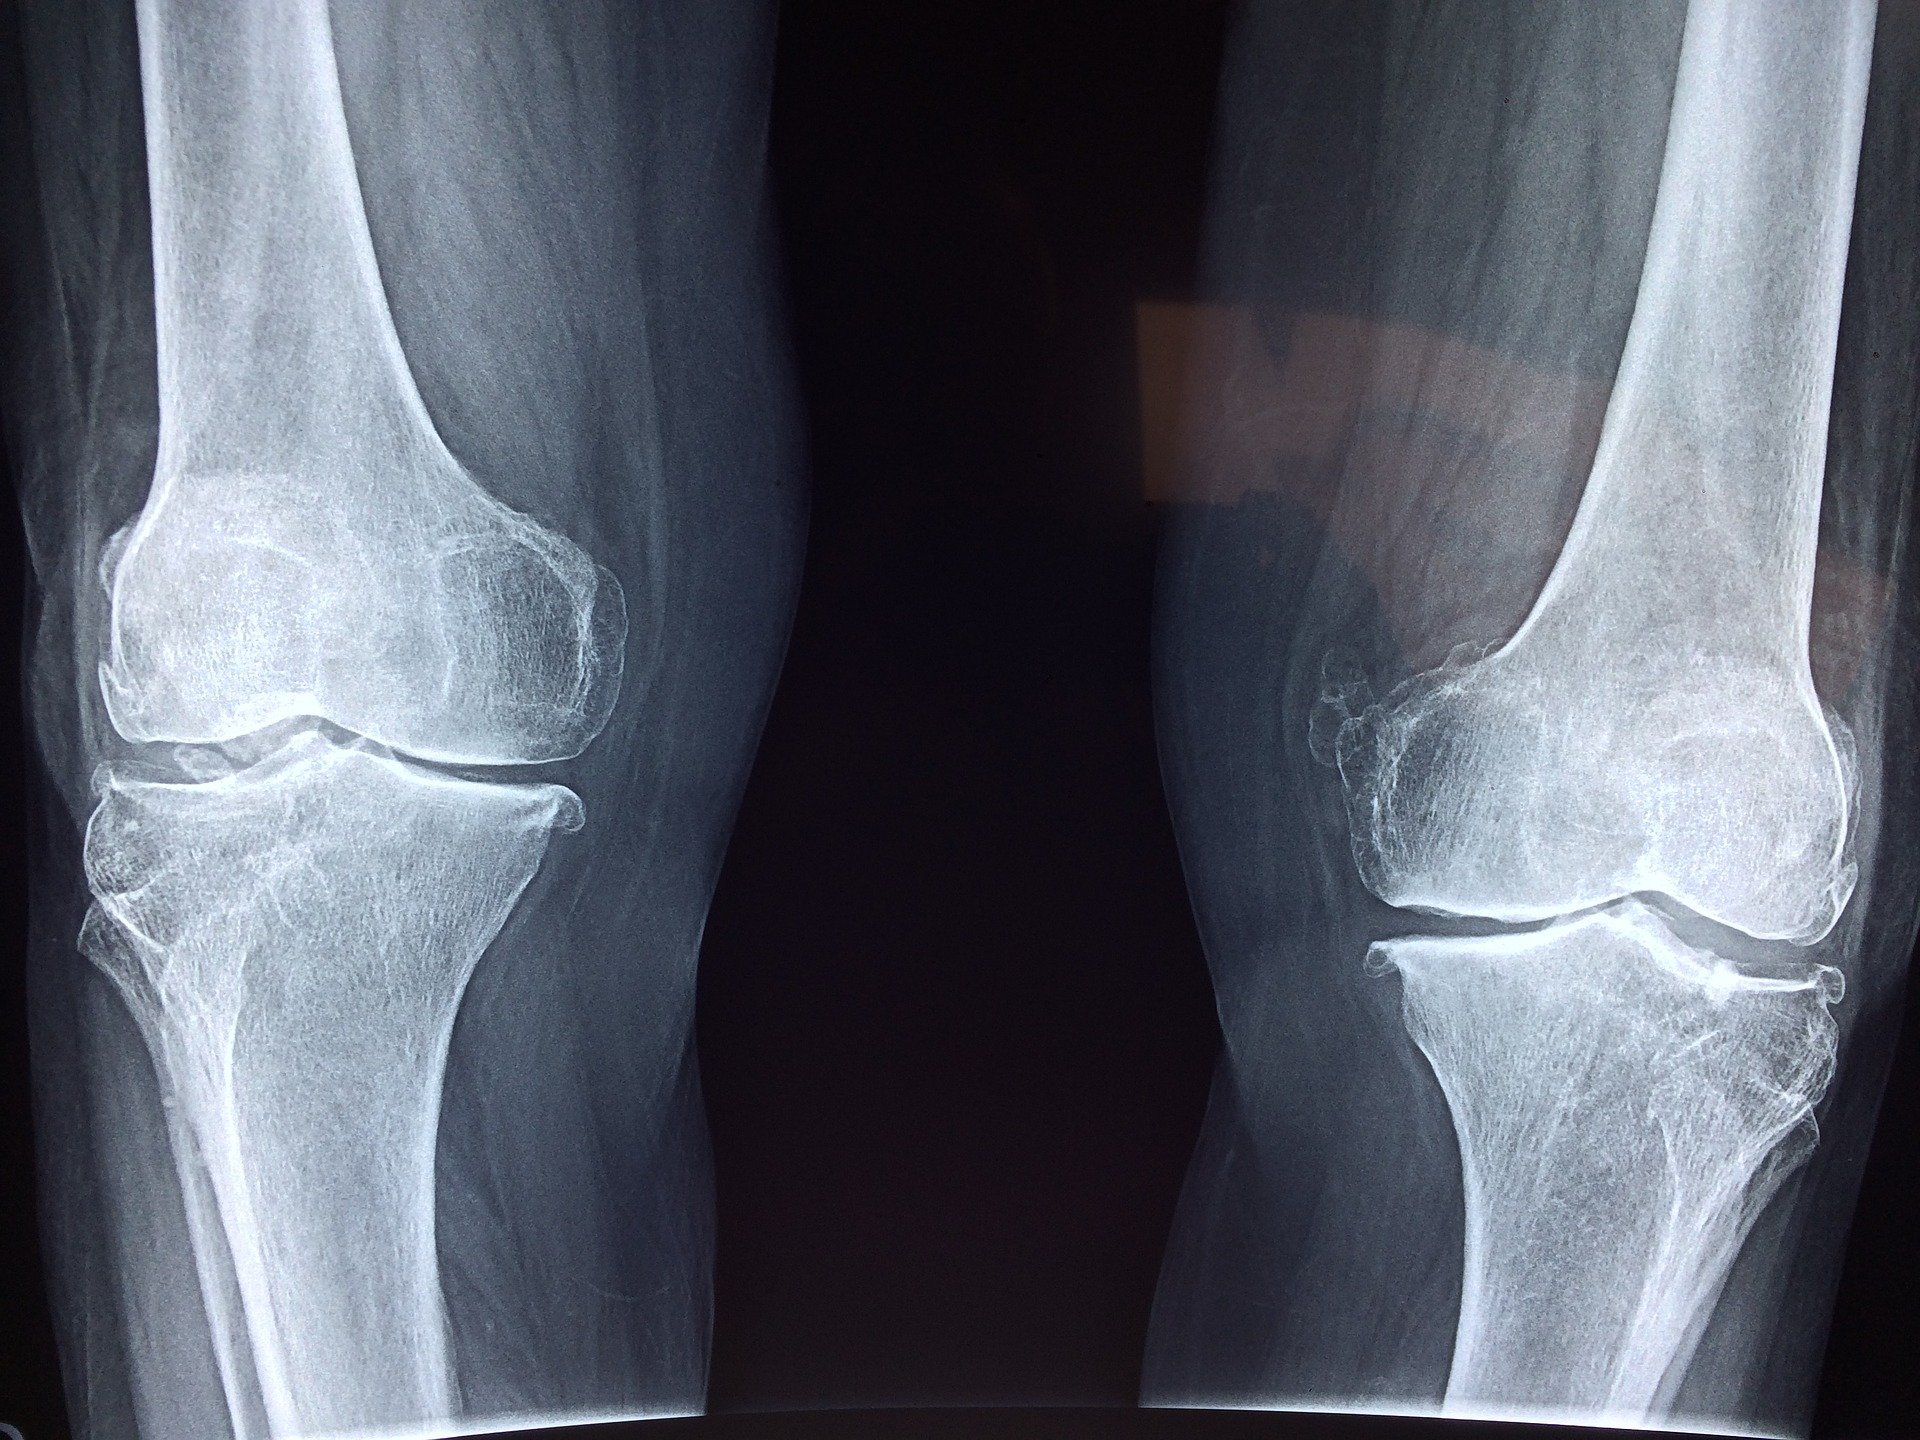 Can I get Social Security Disability for my osteoarthritis of the knee?